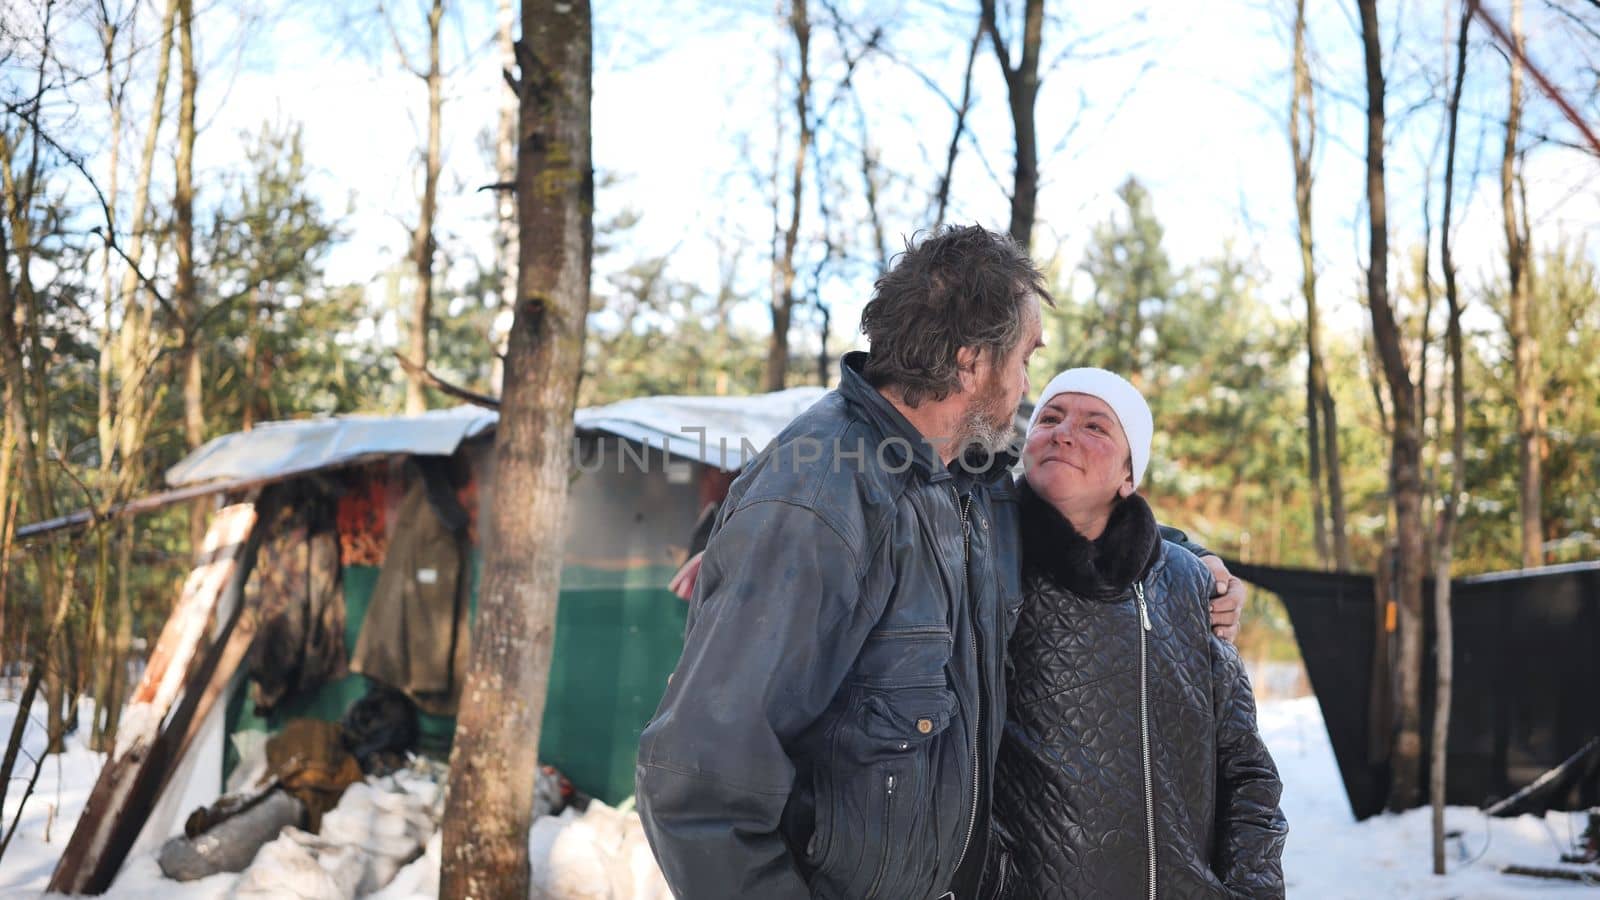 A homeless woman and a man pose in the woods in winter. by DovidPro